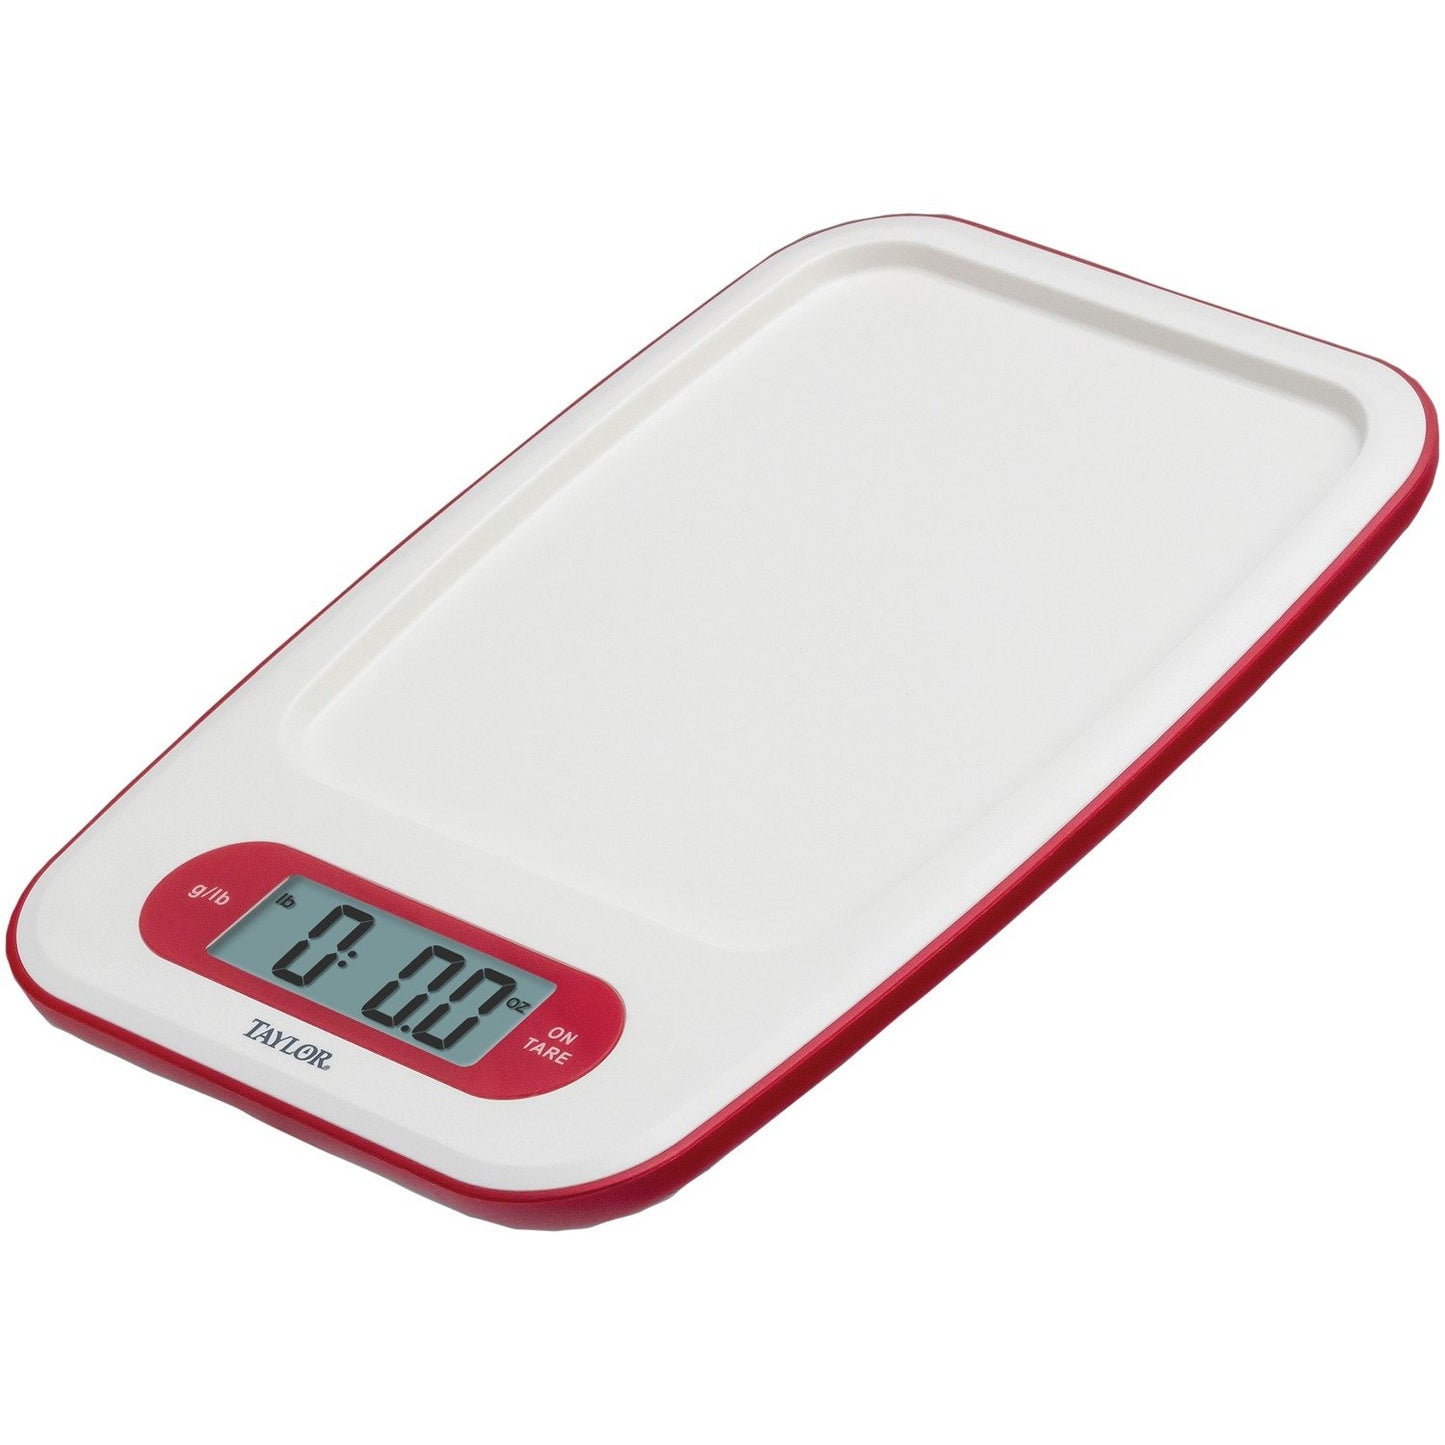 Taylor Precision Products 3856RD Multipurpose Digital Kitchen Scale